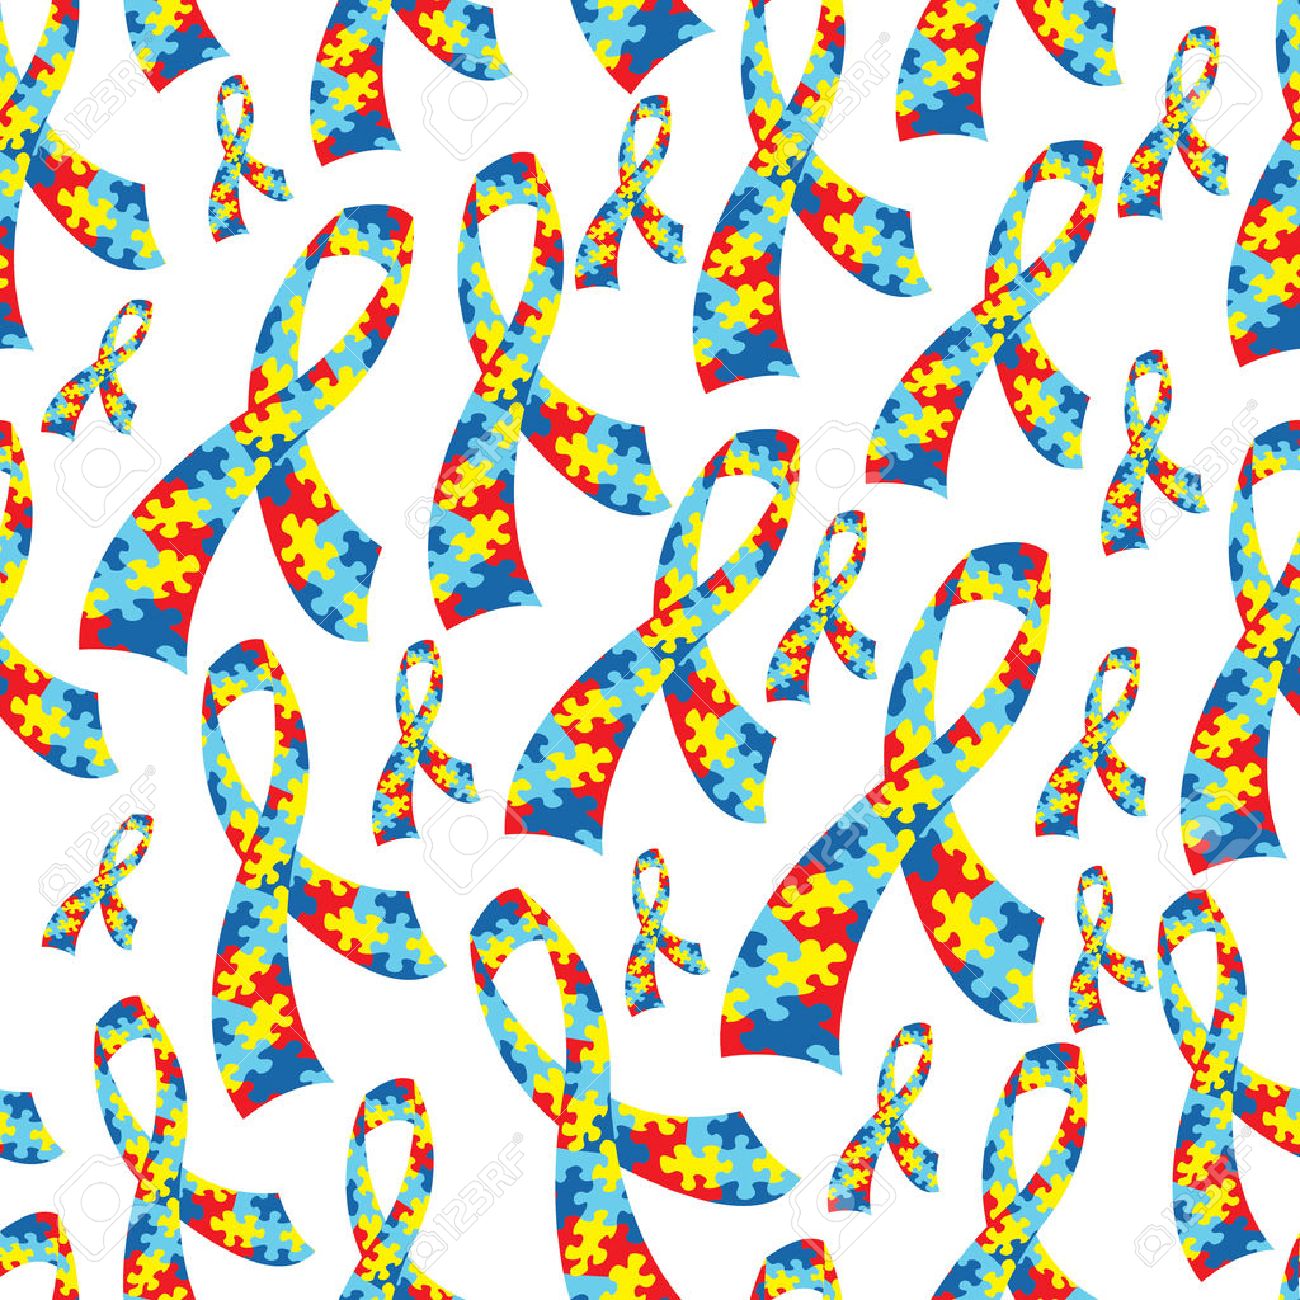 Free download A Seamless Tiled Autism Awareness Ribbon Background ...